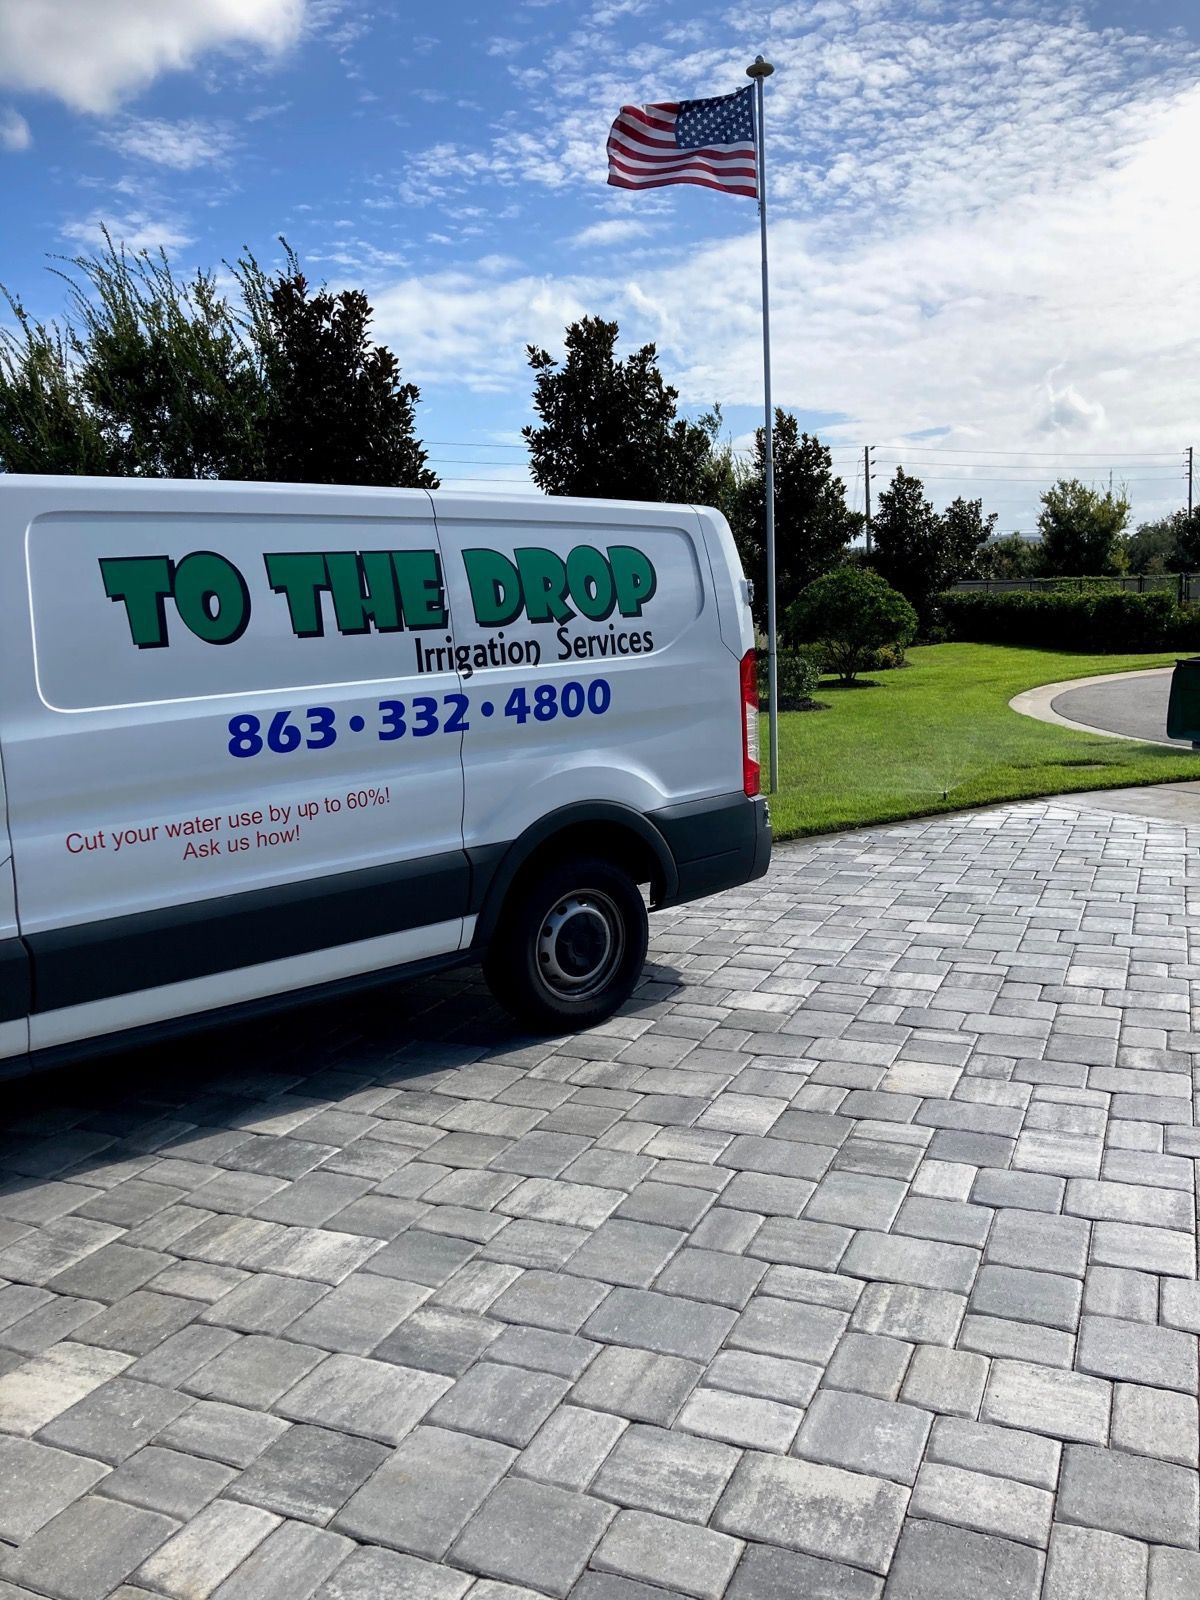 To the Drop Truck - Orlando, FL - To The Drop Irrigation LLC